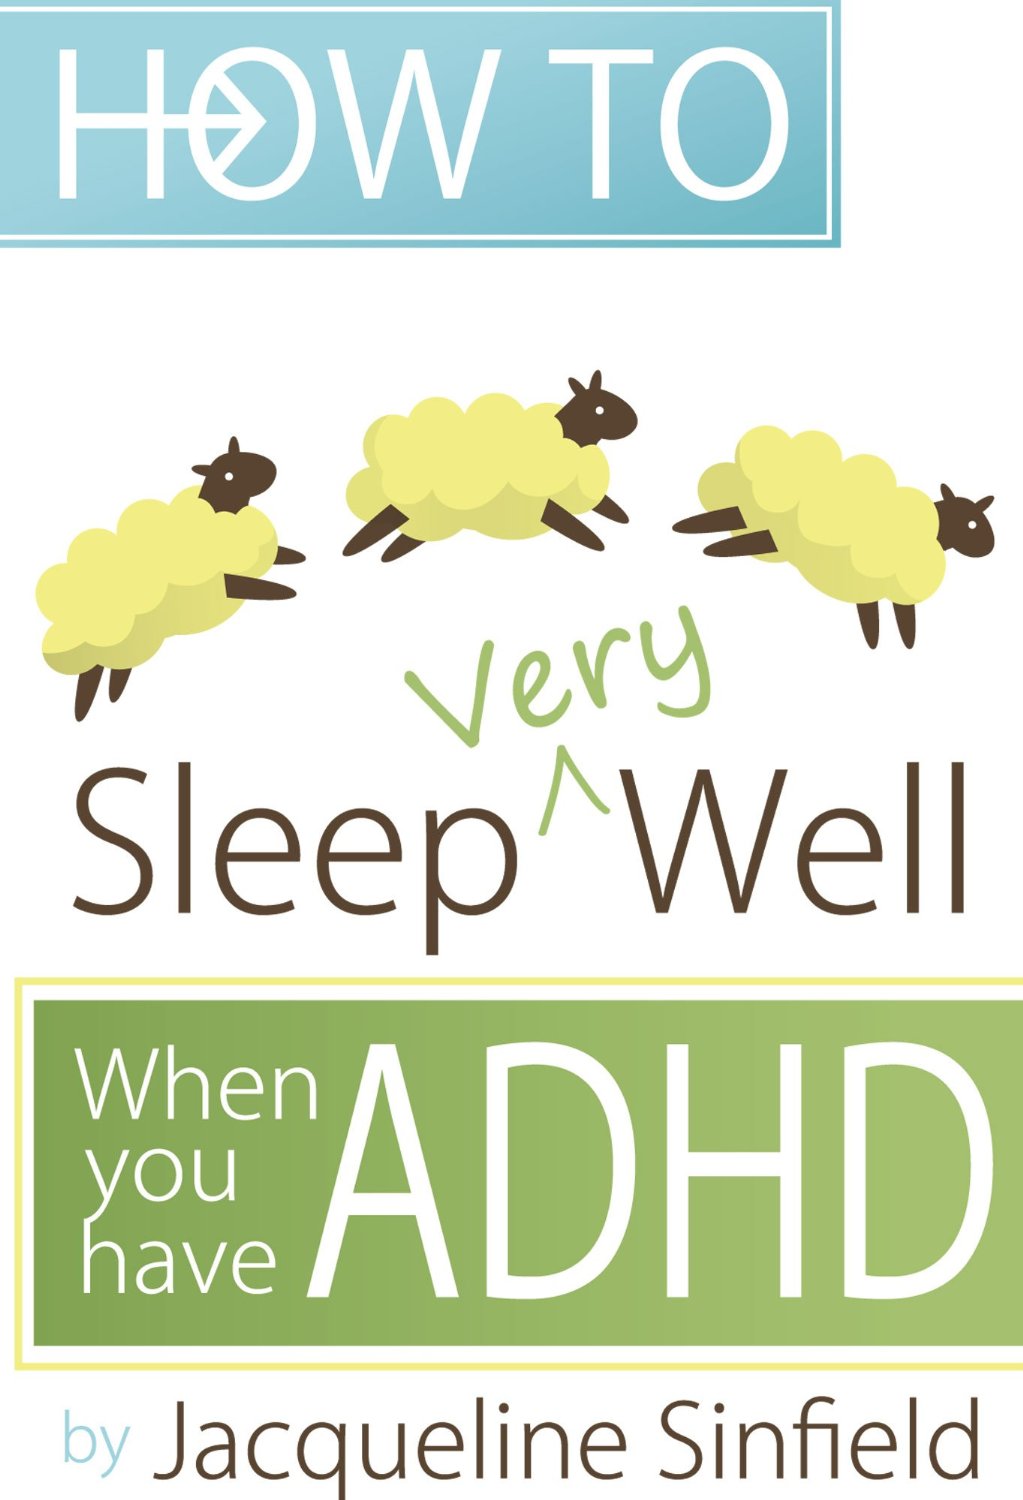 How to Sleep Well when you have ADHD.